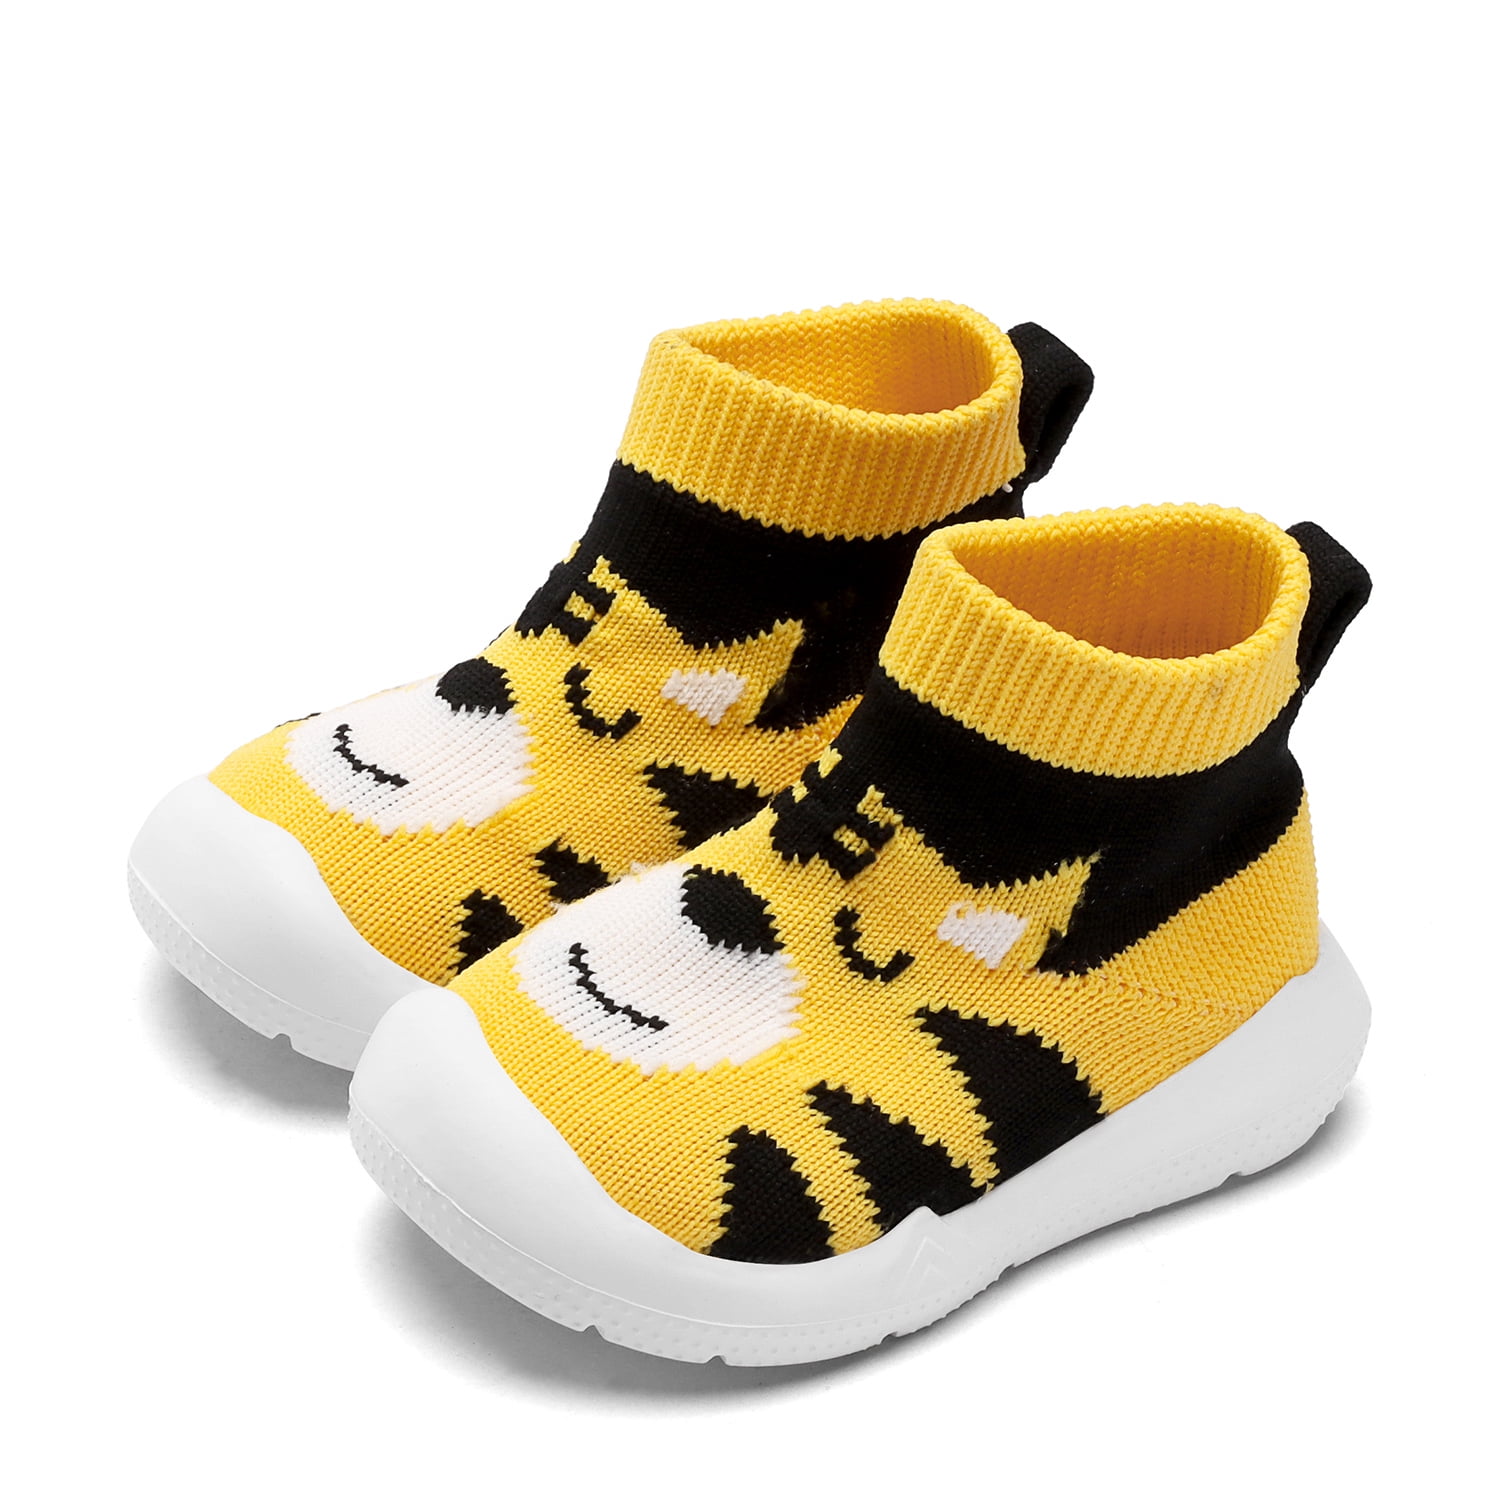 Baby Boy Girls Animal Non-Skid Indoor Slipper Infants Breathable Elastic Socks Shoes with Memory Insole Protect Toes Panda Tiger Fox 